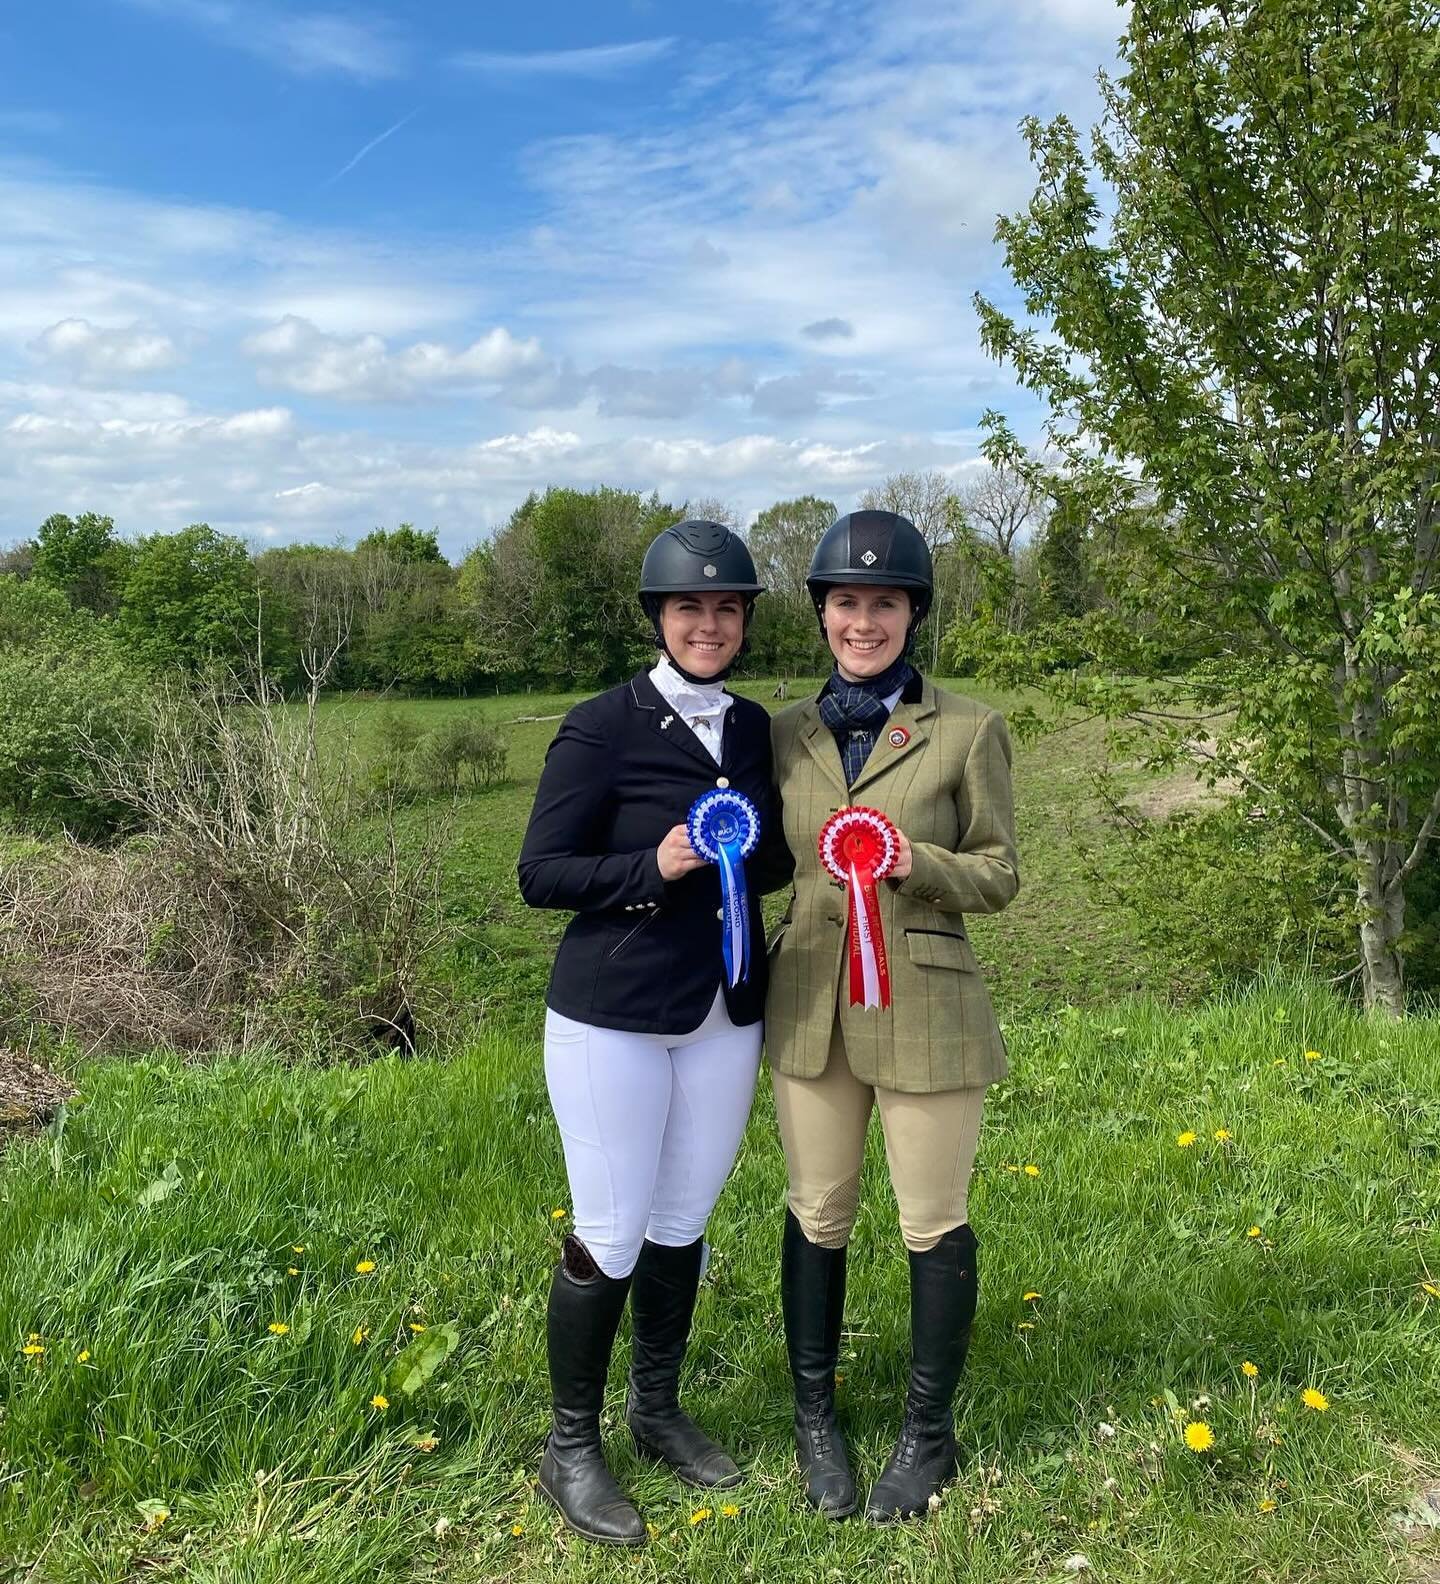 WE&rsquo;RE OFF TO NATIONALS! Successful day at Championship Regionals, where Jess and Caitlin were competing as individuals. A lovely social day and great fun to see some different horses out! They came away with Caitlin in 2nd and Jess in 1st!!! Bo